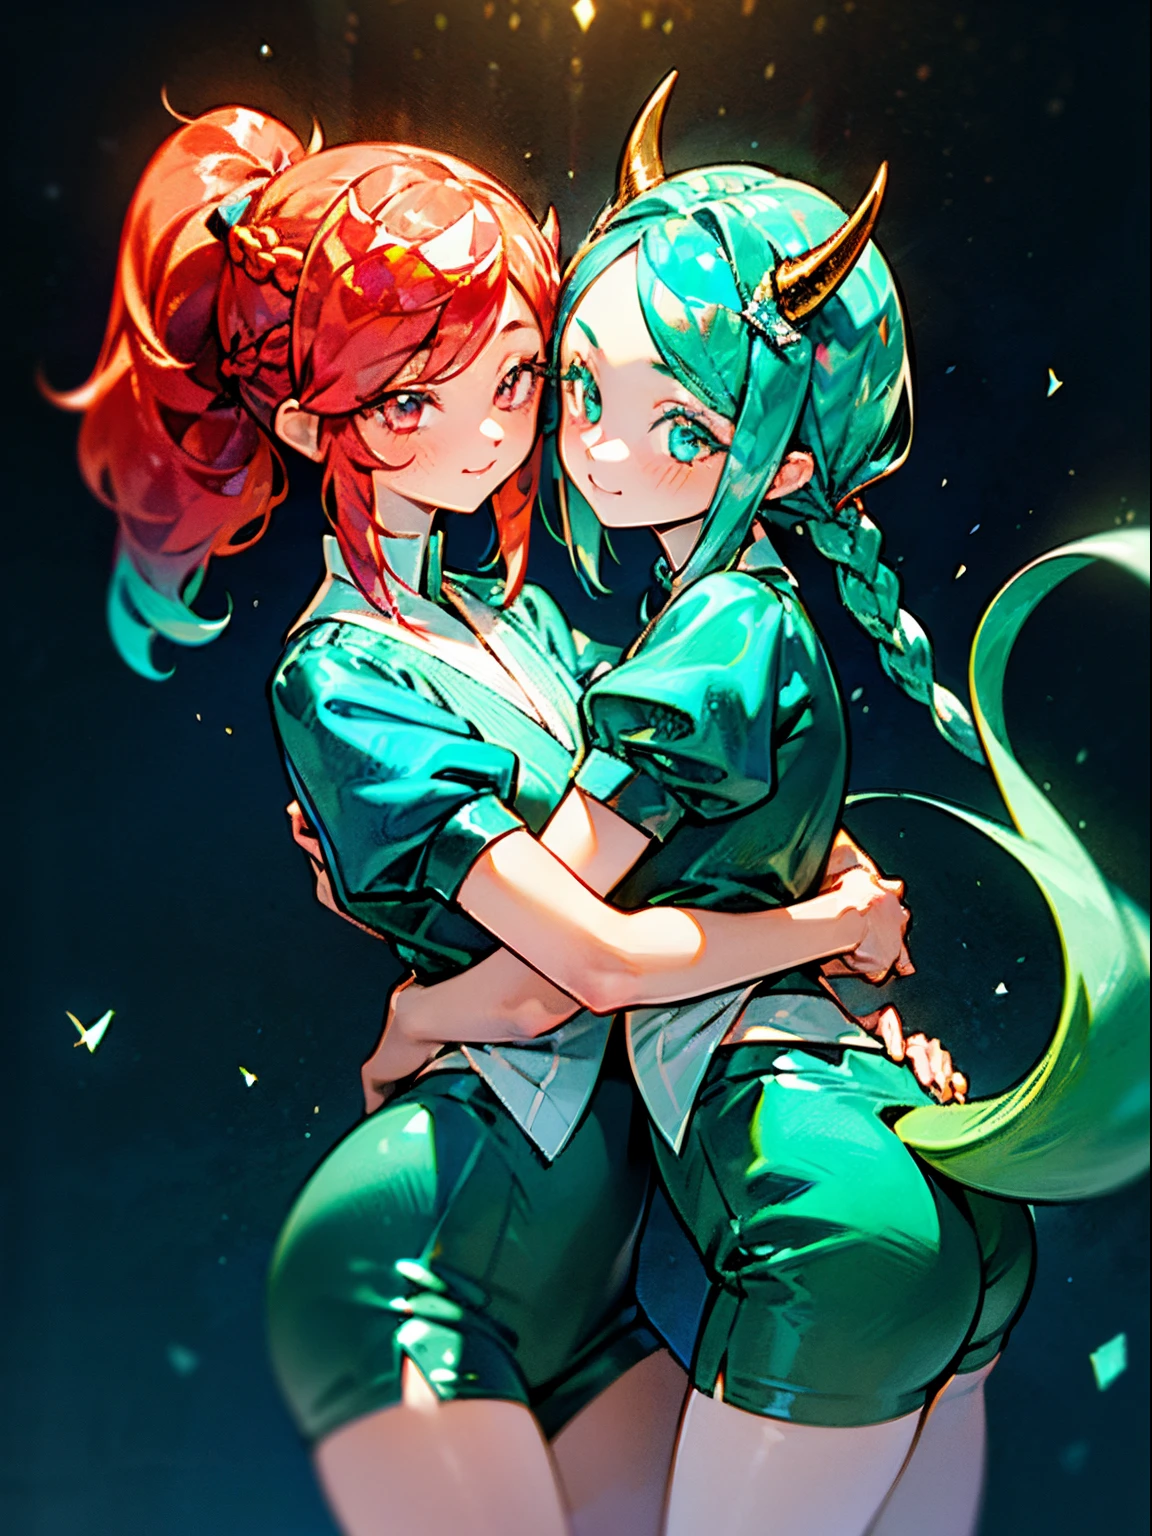 Close-up of two girlfriends with different precious hair, yuri, The first girl has blue hair, and pink eyes., the second girl has green-turquoise hair, collected in two braids, turning into horns, and bureaucratic eyes, (((Two girls hugging))), the same age, Young, ((in the style of Ichikawa Haruko)), Hauskie is not, The Land of Precious Stones, Original character, ((tmasterpiece)), (((beste-Qualit))), ((ultradetailed)), ((illustartion)), [The light effect of realism], eye shadow, (fantasy style), Simple background, illustartion, 2 girls, sly look, Majestic view (multi-colored hair, Hair gradient, Hair color from blue to peach, without bangs, (Side bangs), curly curl on the cheek, hairstyle: high ponytail, long tail), The eyes are crimson-red, Environment change scene, wide eyes, Lashes, side glance, Crystal hair, Glowing Hair, shirt with collar, galaxy, Additional lighting, uniform, tie, puffy short sleeves, Shorts, Smile, puffy short sleeves, Puffy armbands, Shirt, short sleeve, sparkle, Small flat chest, Girl with two long green pigtails and a happy face, wide eyes, turquoise hair, Turquoise textured hair, Double Long Bangs, Green eyes, (turquoise two pigtails), (braids), ((Two-braid hairstyle)), Two pigtails, turquoise horns